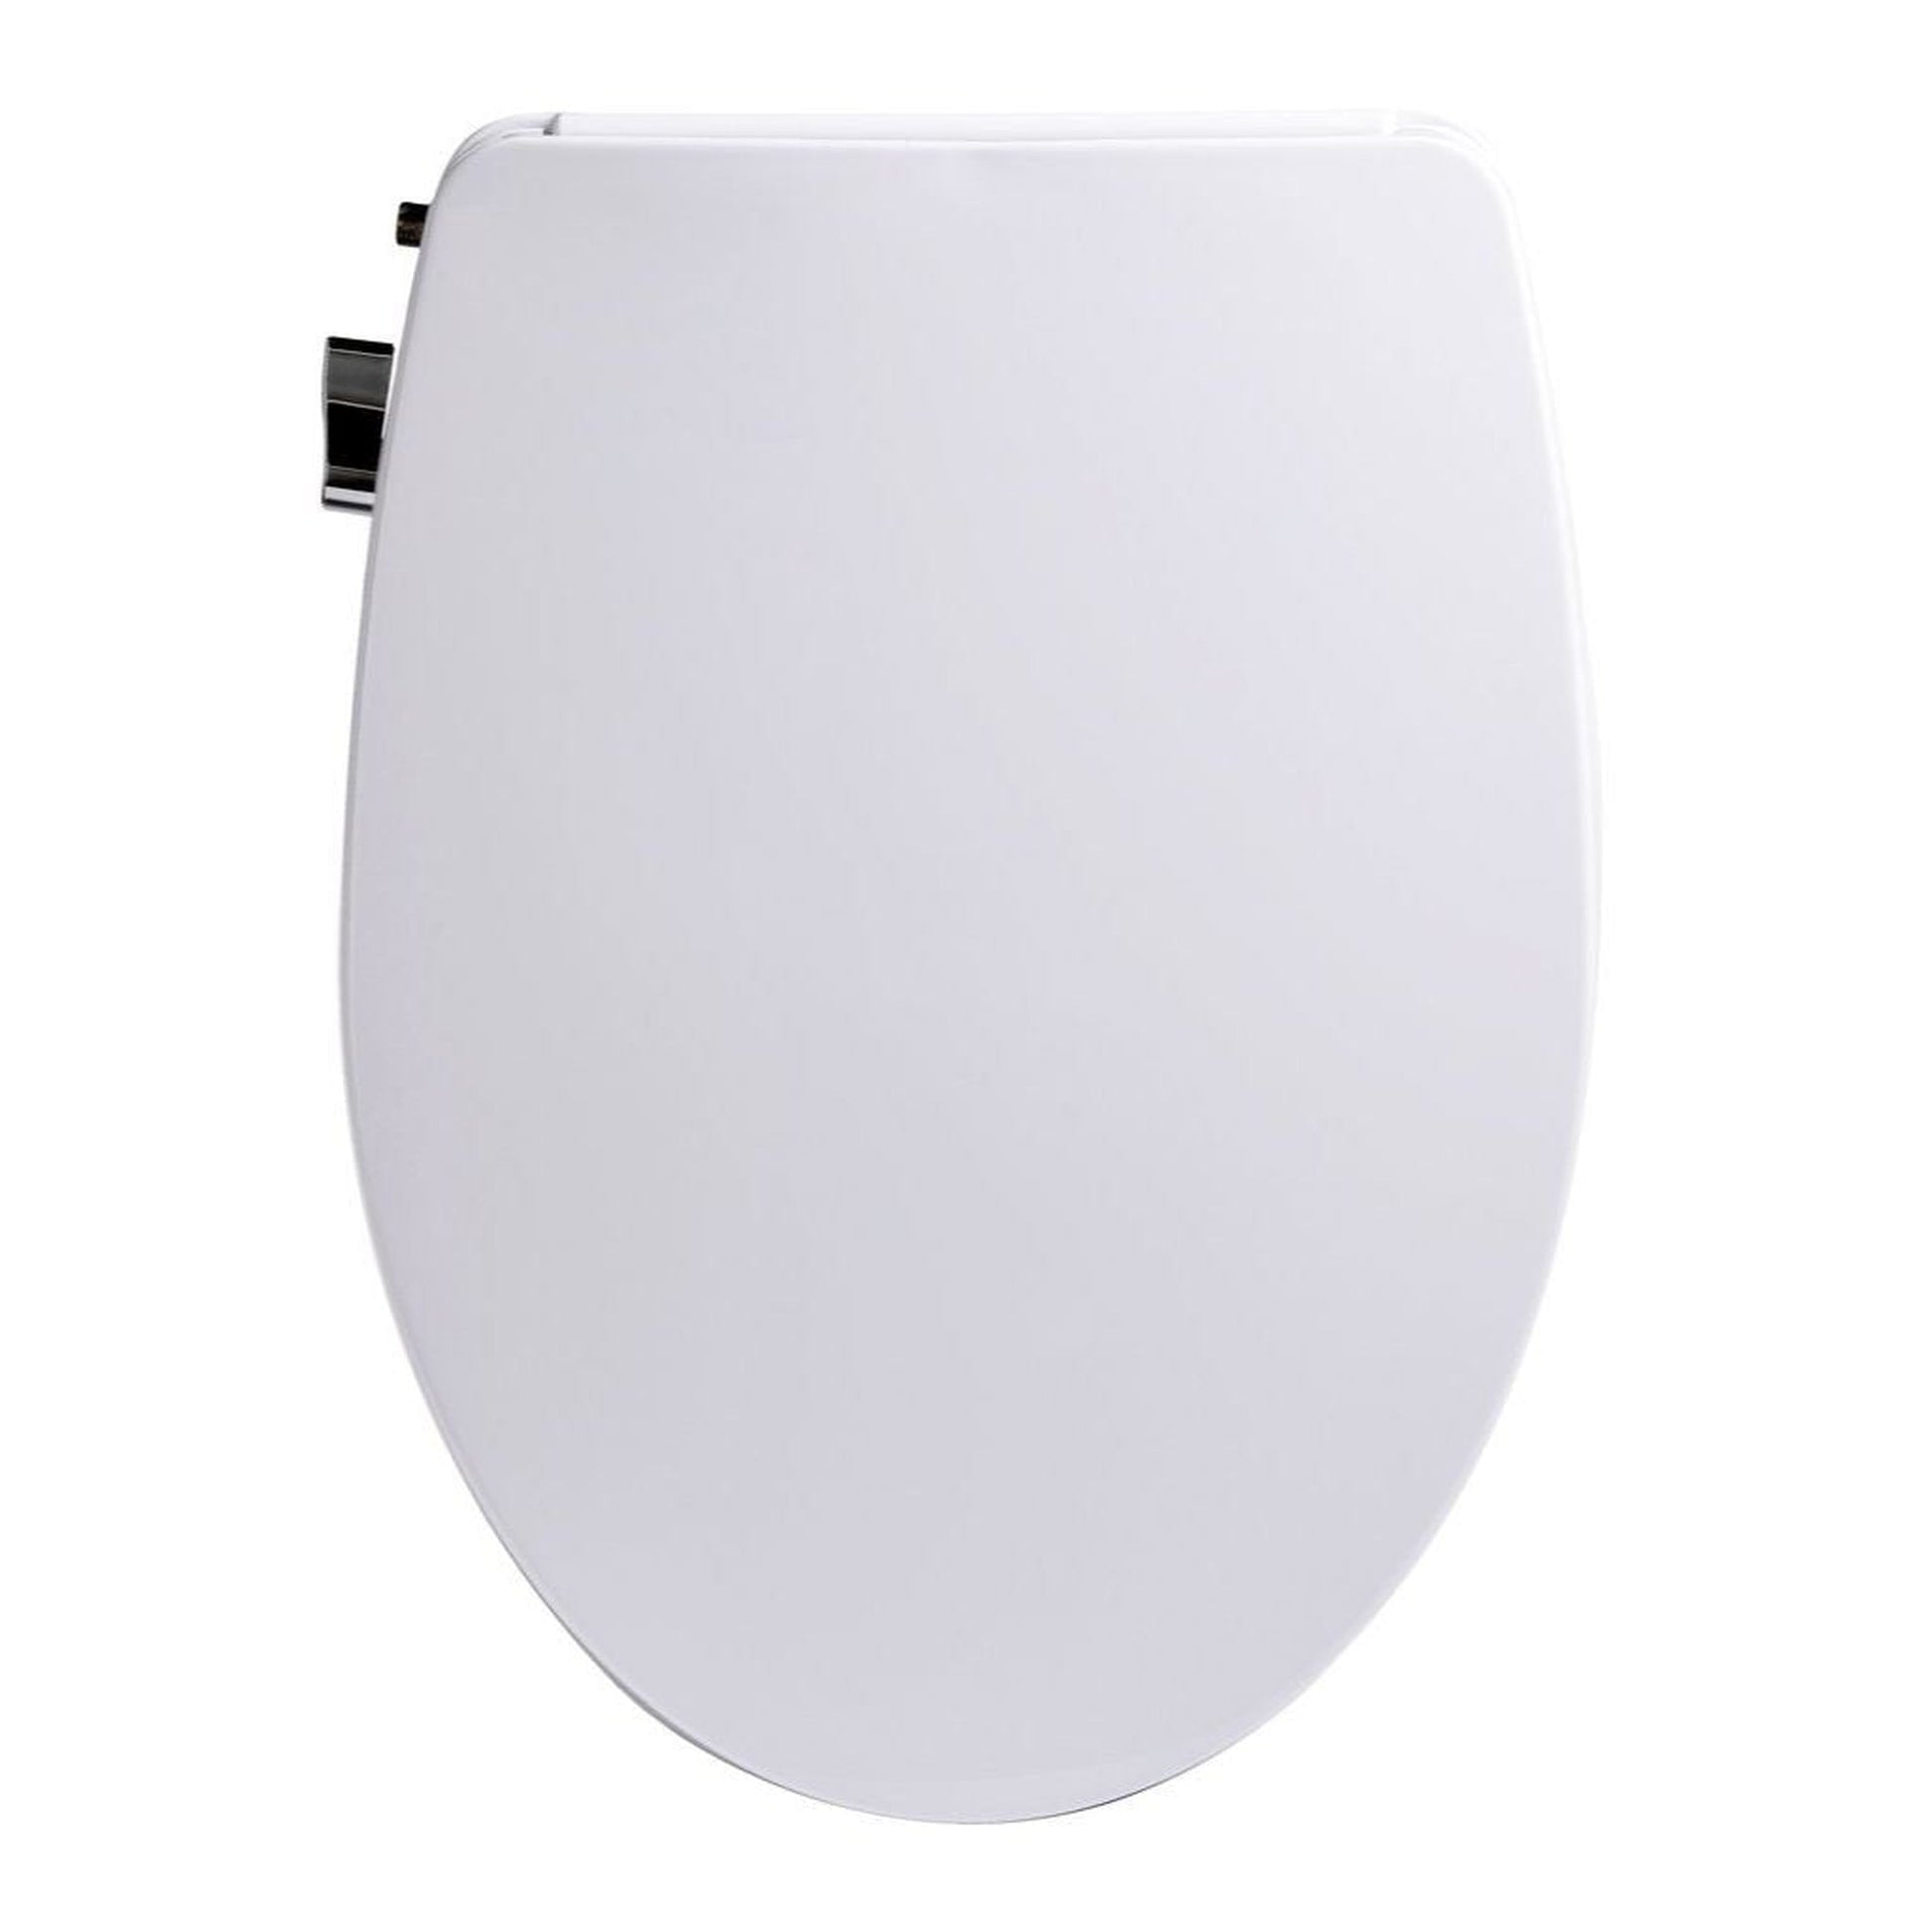 Elongated LED Light Electric Bidet Toilet Seat Heated Toilet Seat with Warm  Air Dryer and Night Light